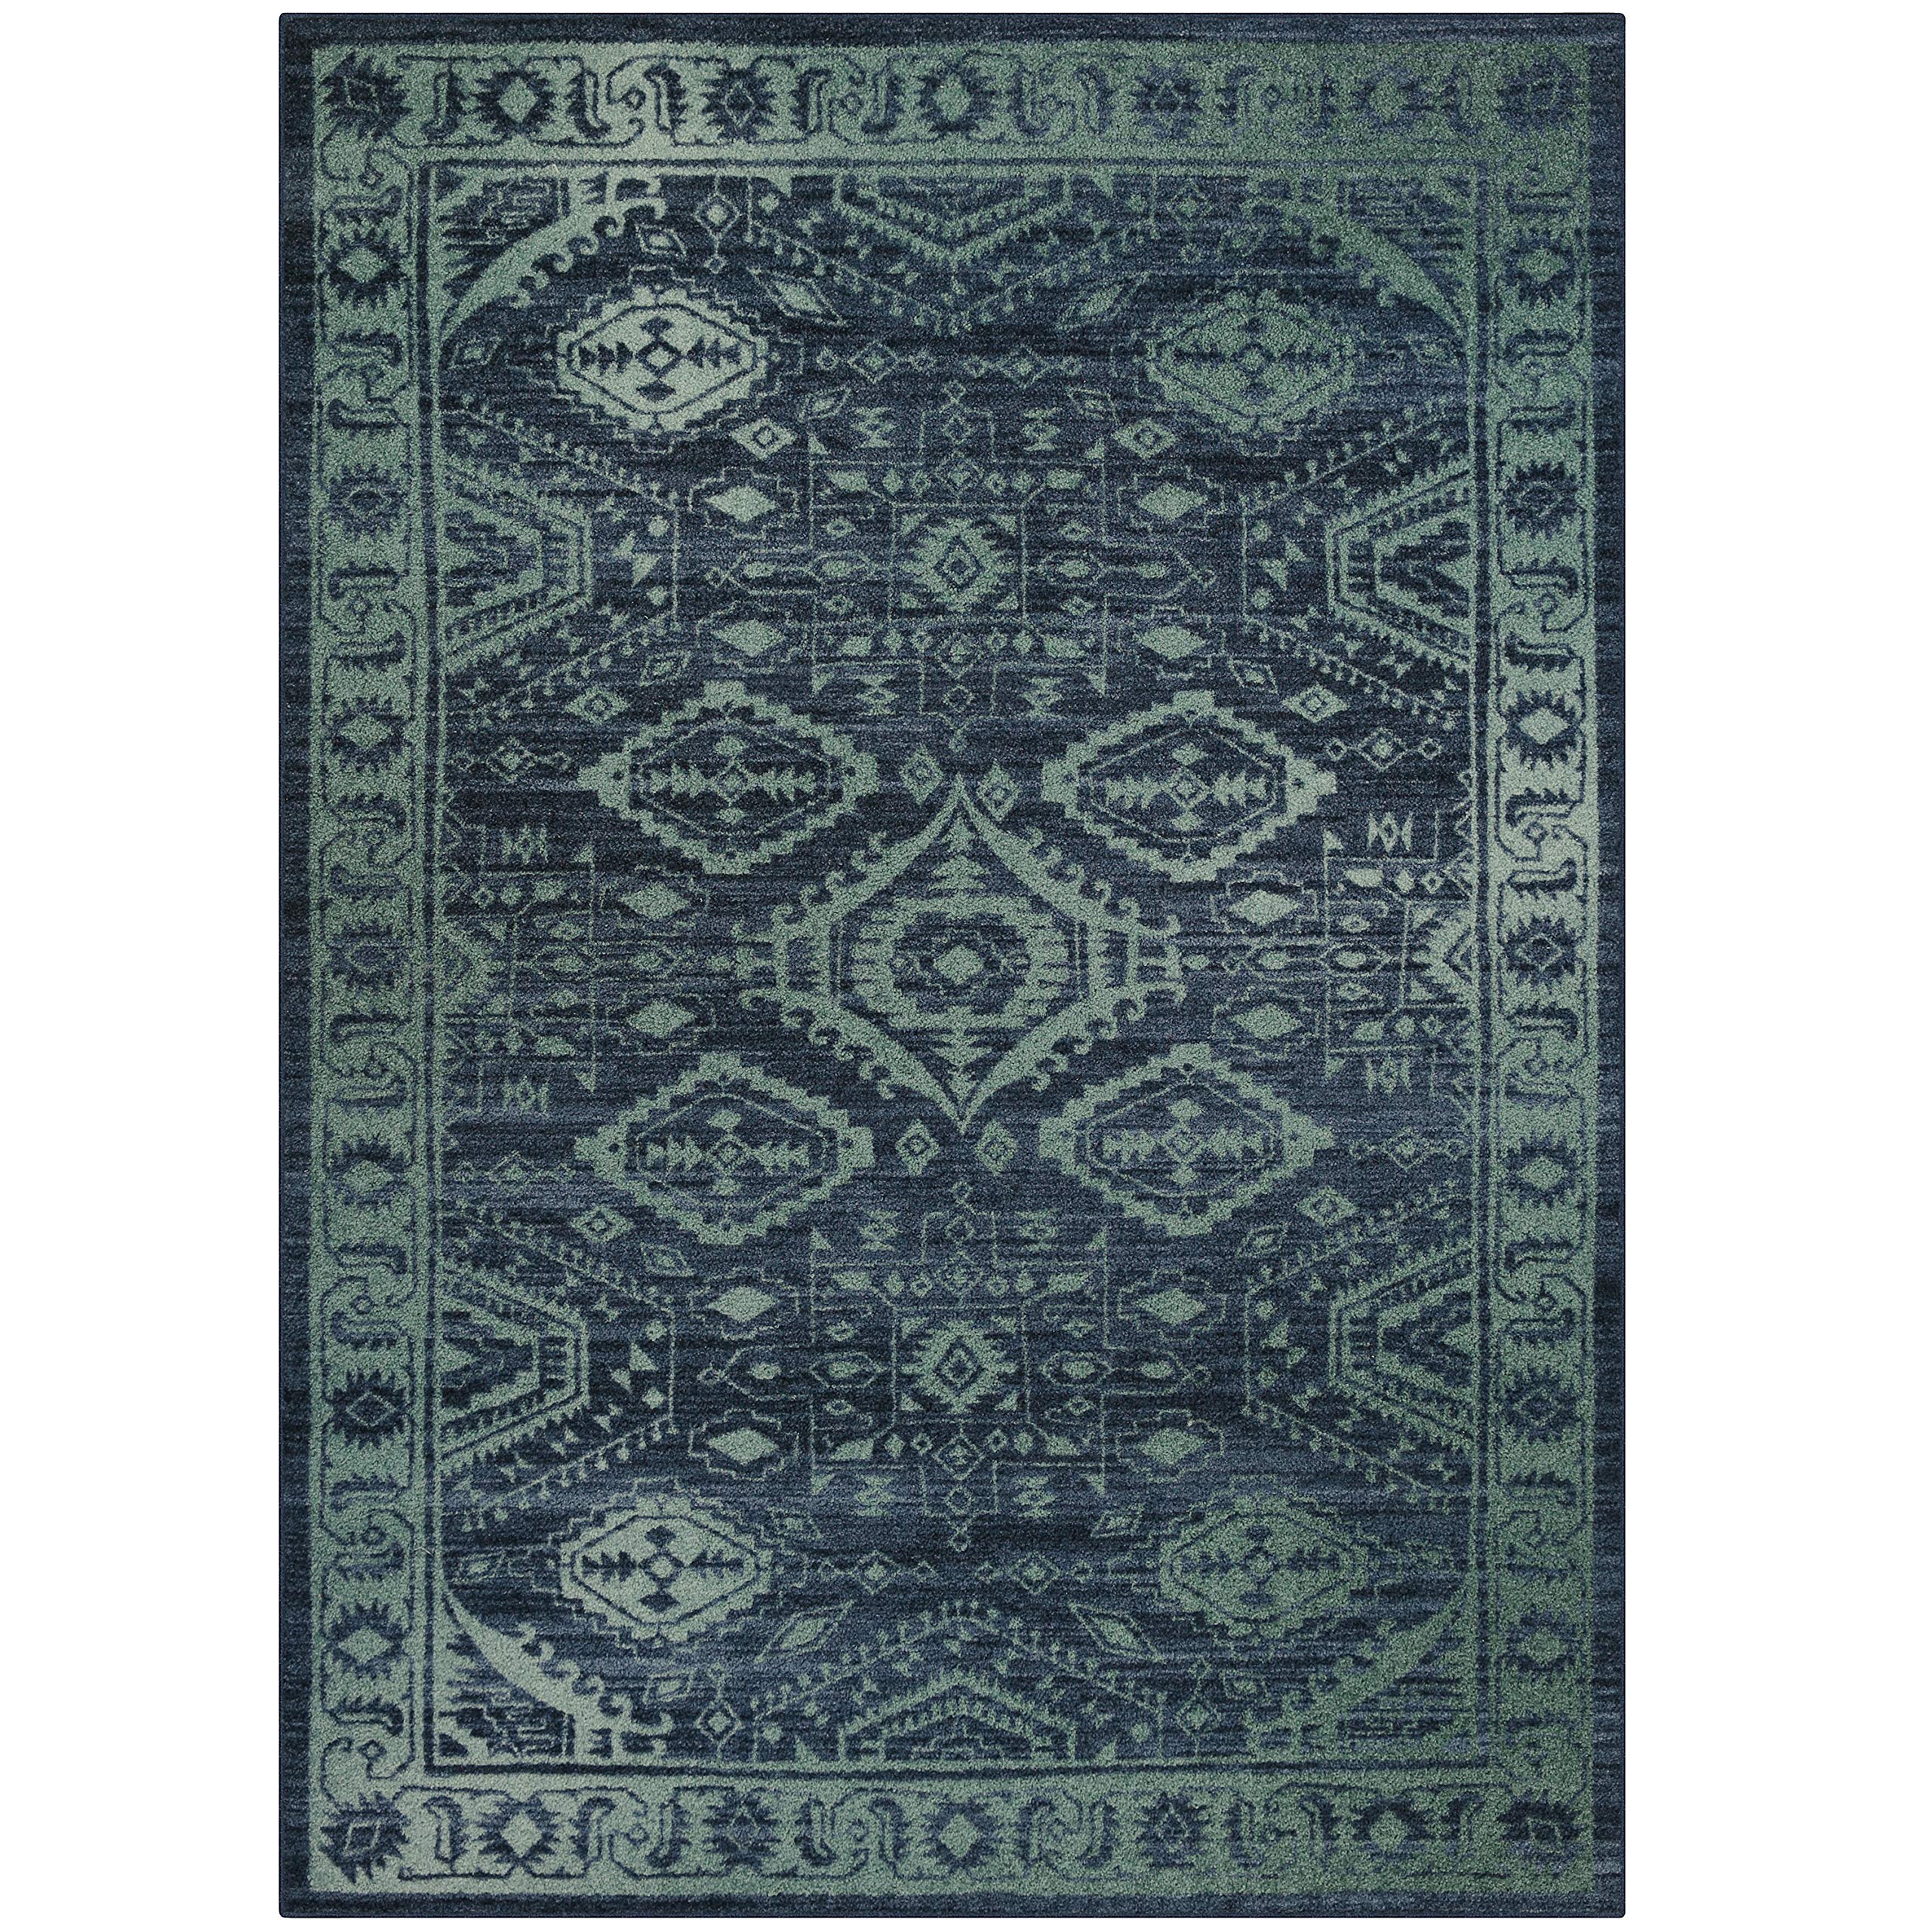 Maples Rugs Georgina Traditional Area Rugs for Living Room & Bedroom [Made in USA], 5 x 7, Navy Blue/Green